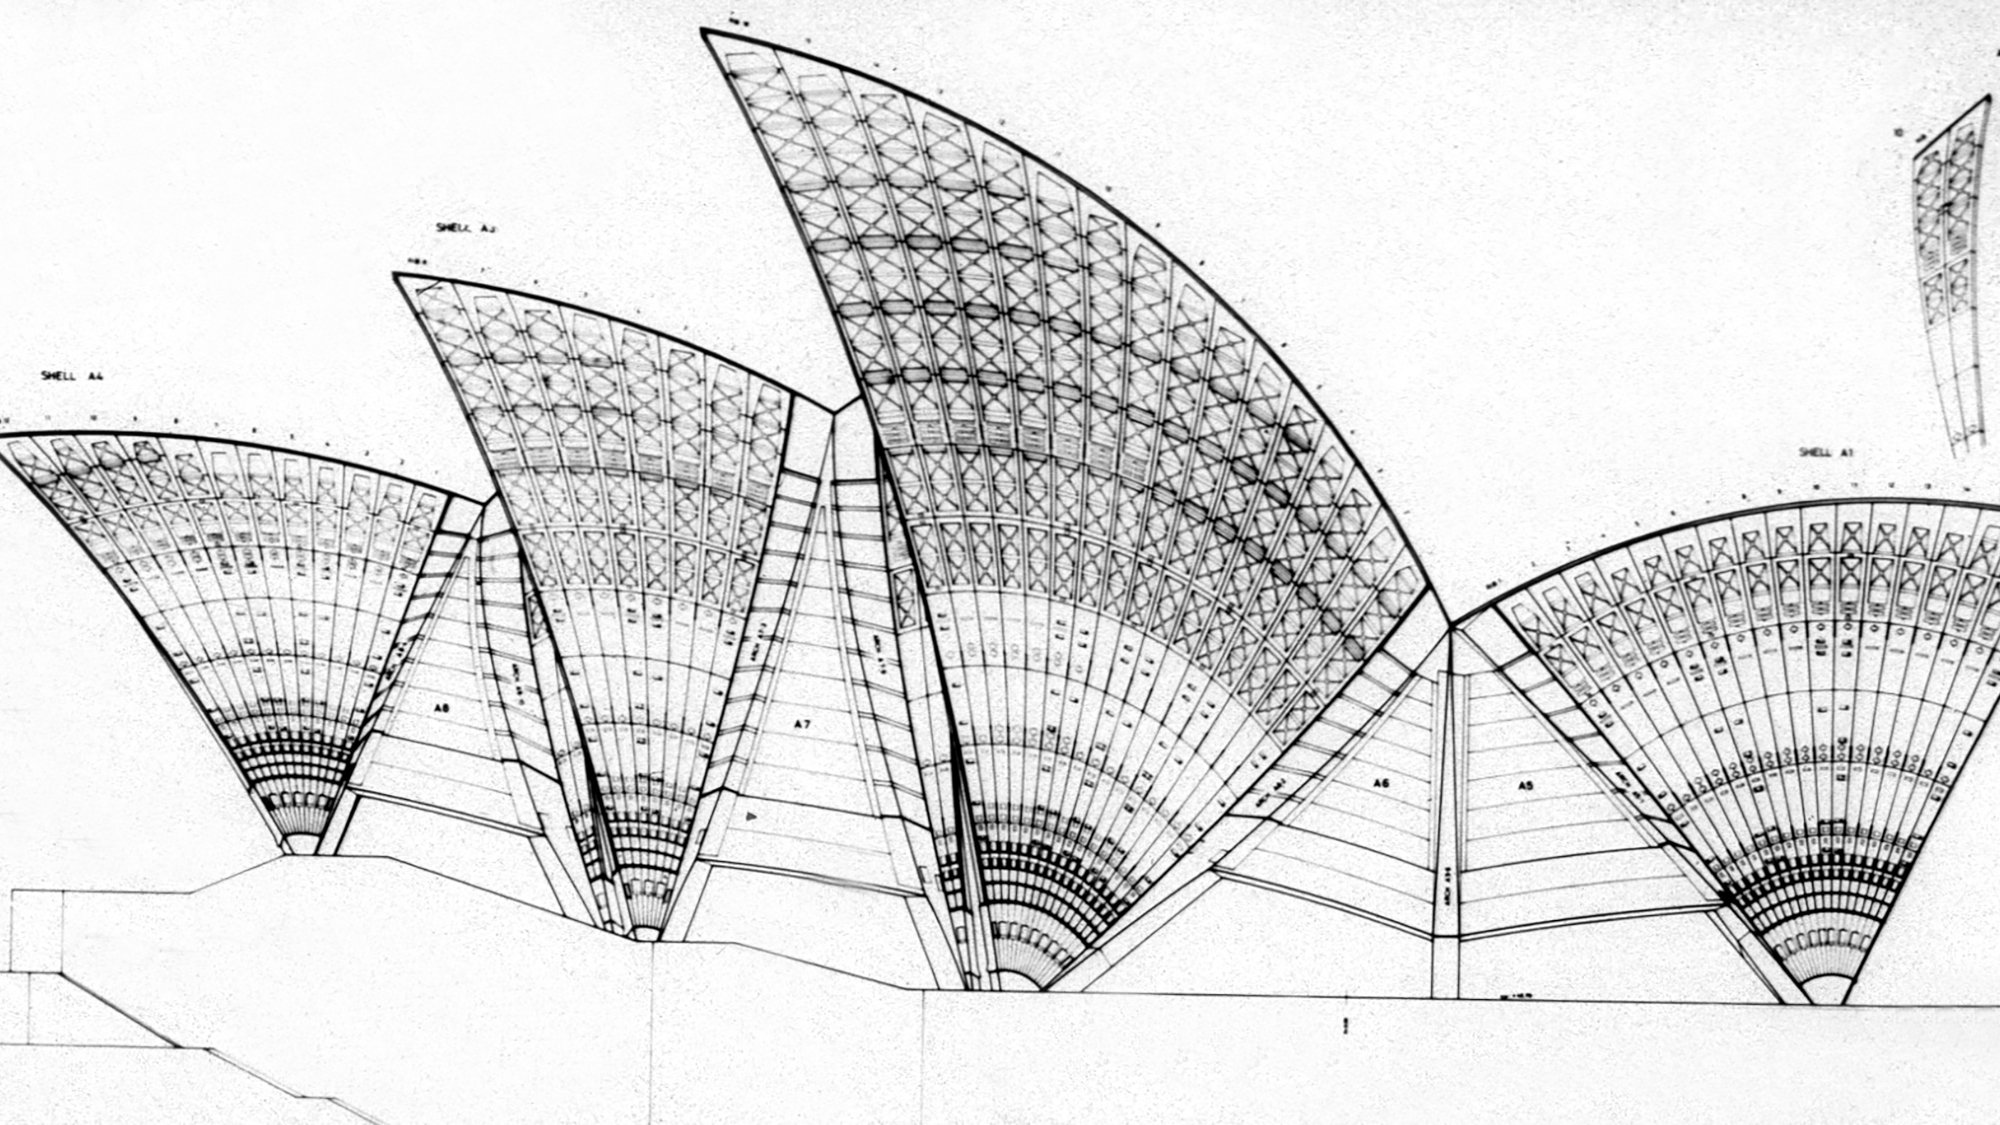 Engineer's sketch of the Sydney Opera House's shells